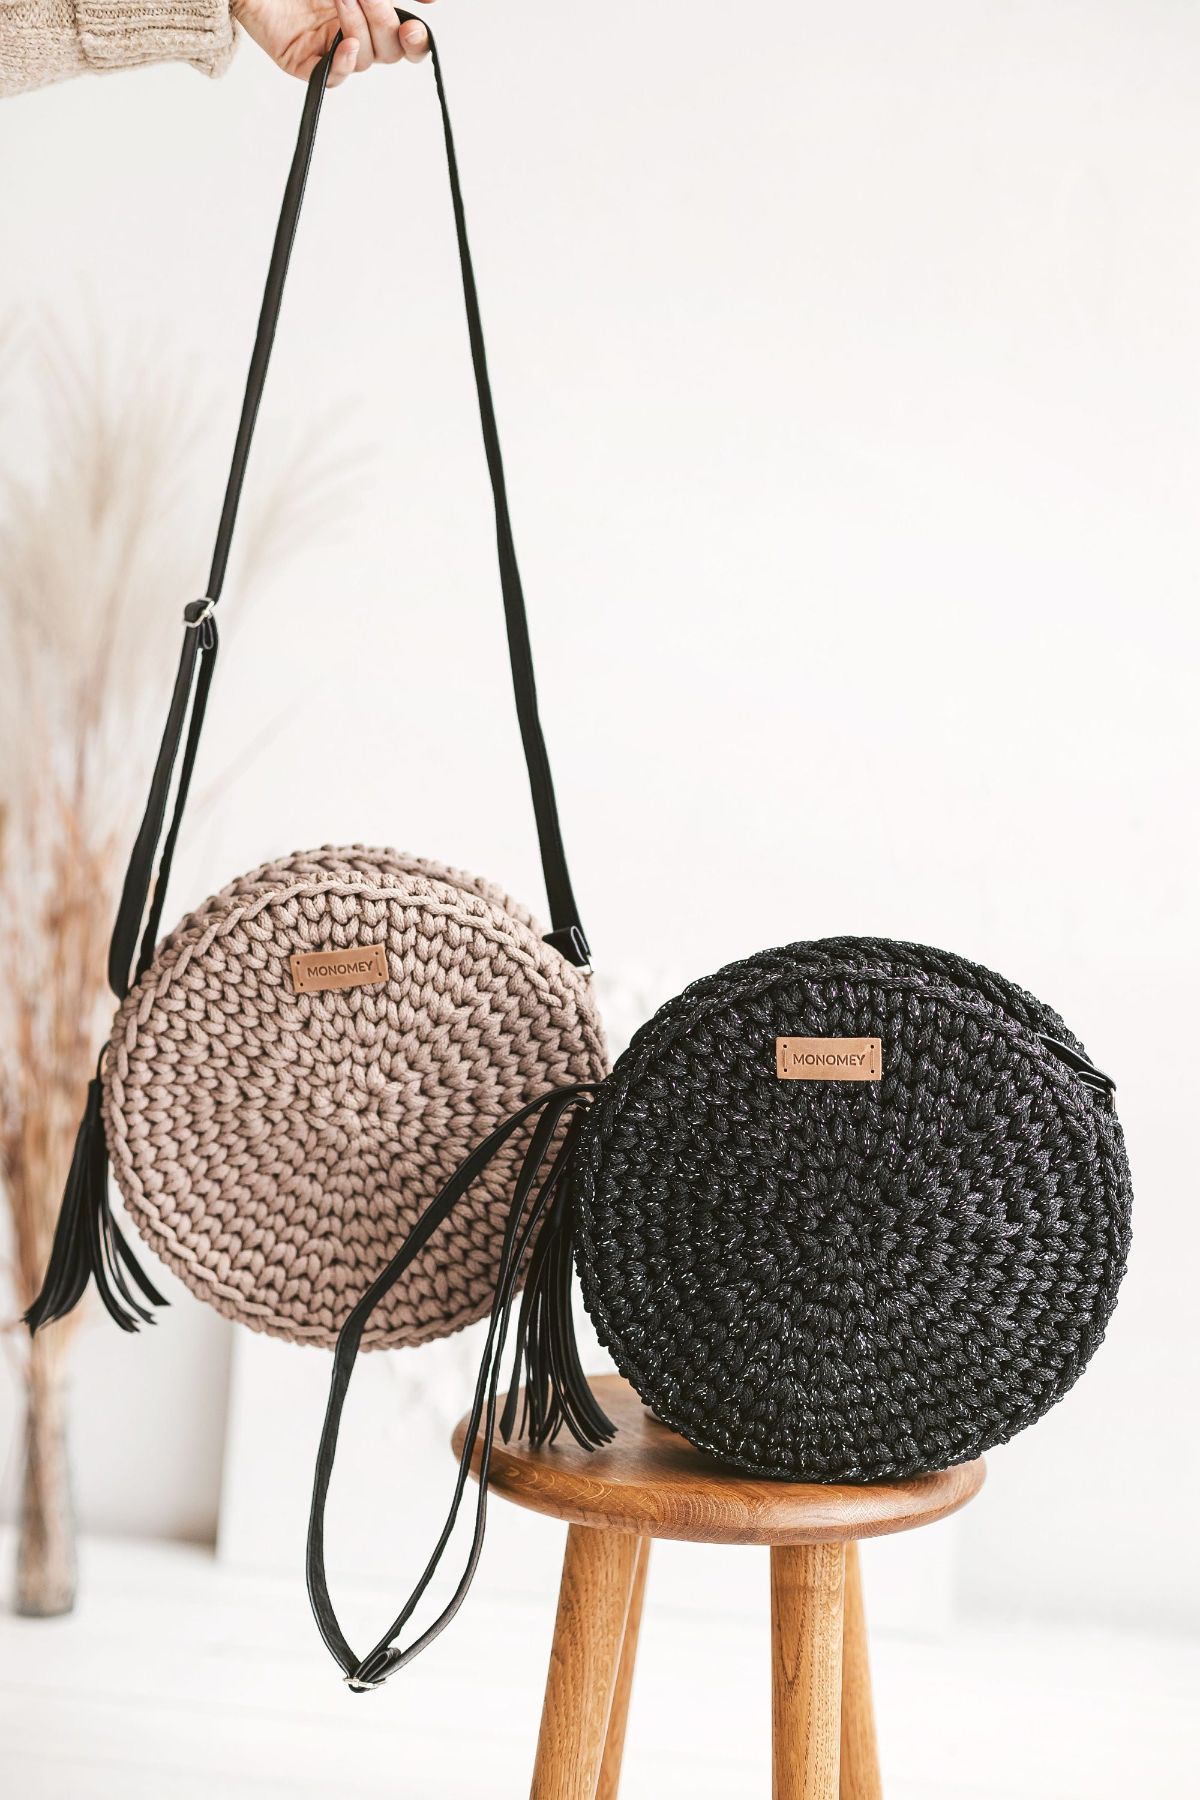 A black round crochet bag with a long strap and tassle on a wooden stool with the same bag in pale pink hanging behind it.